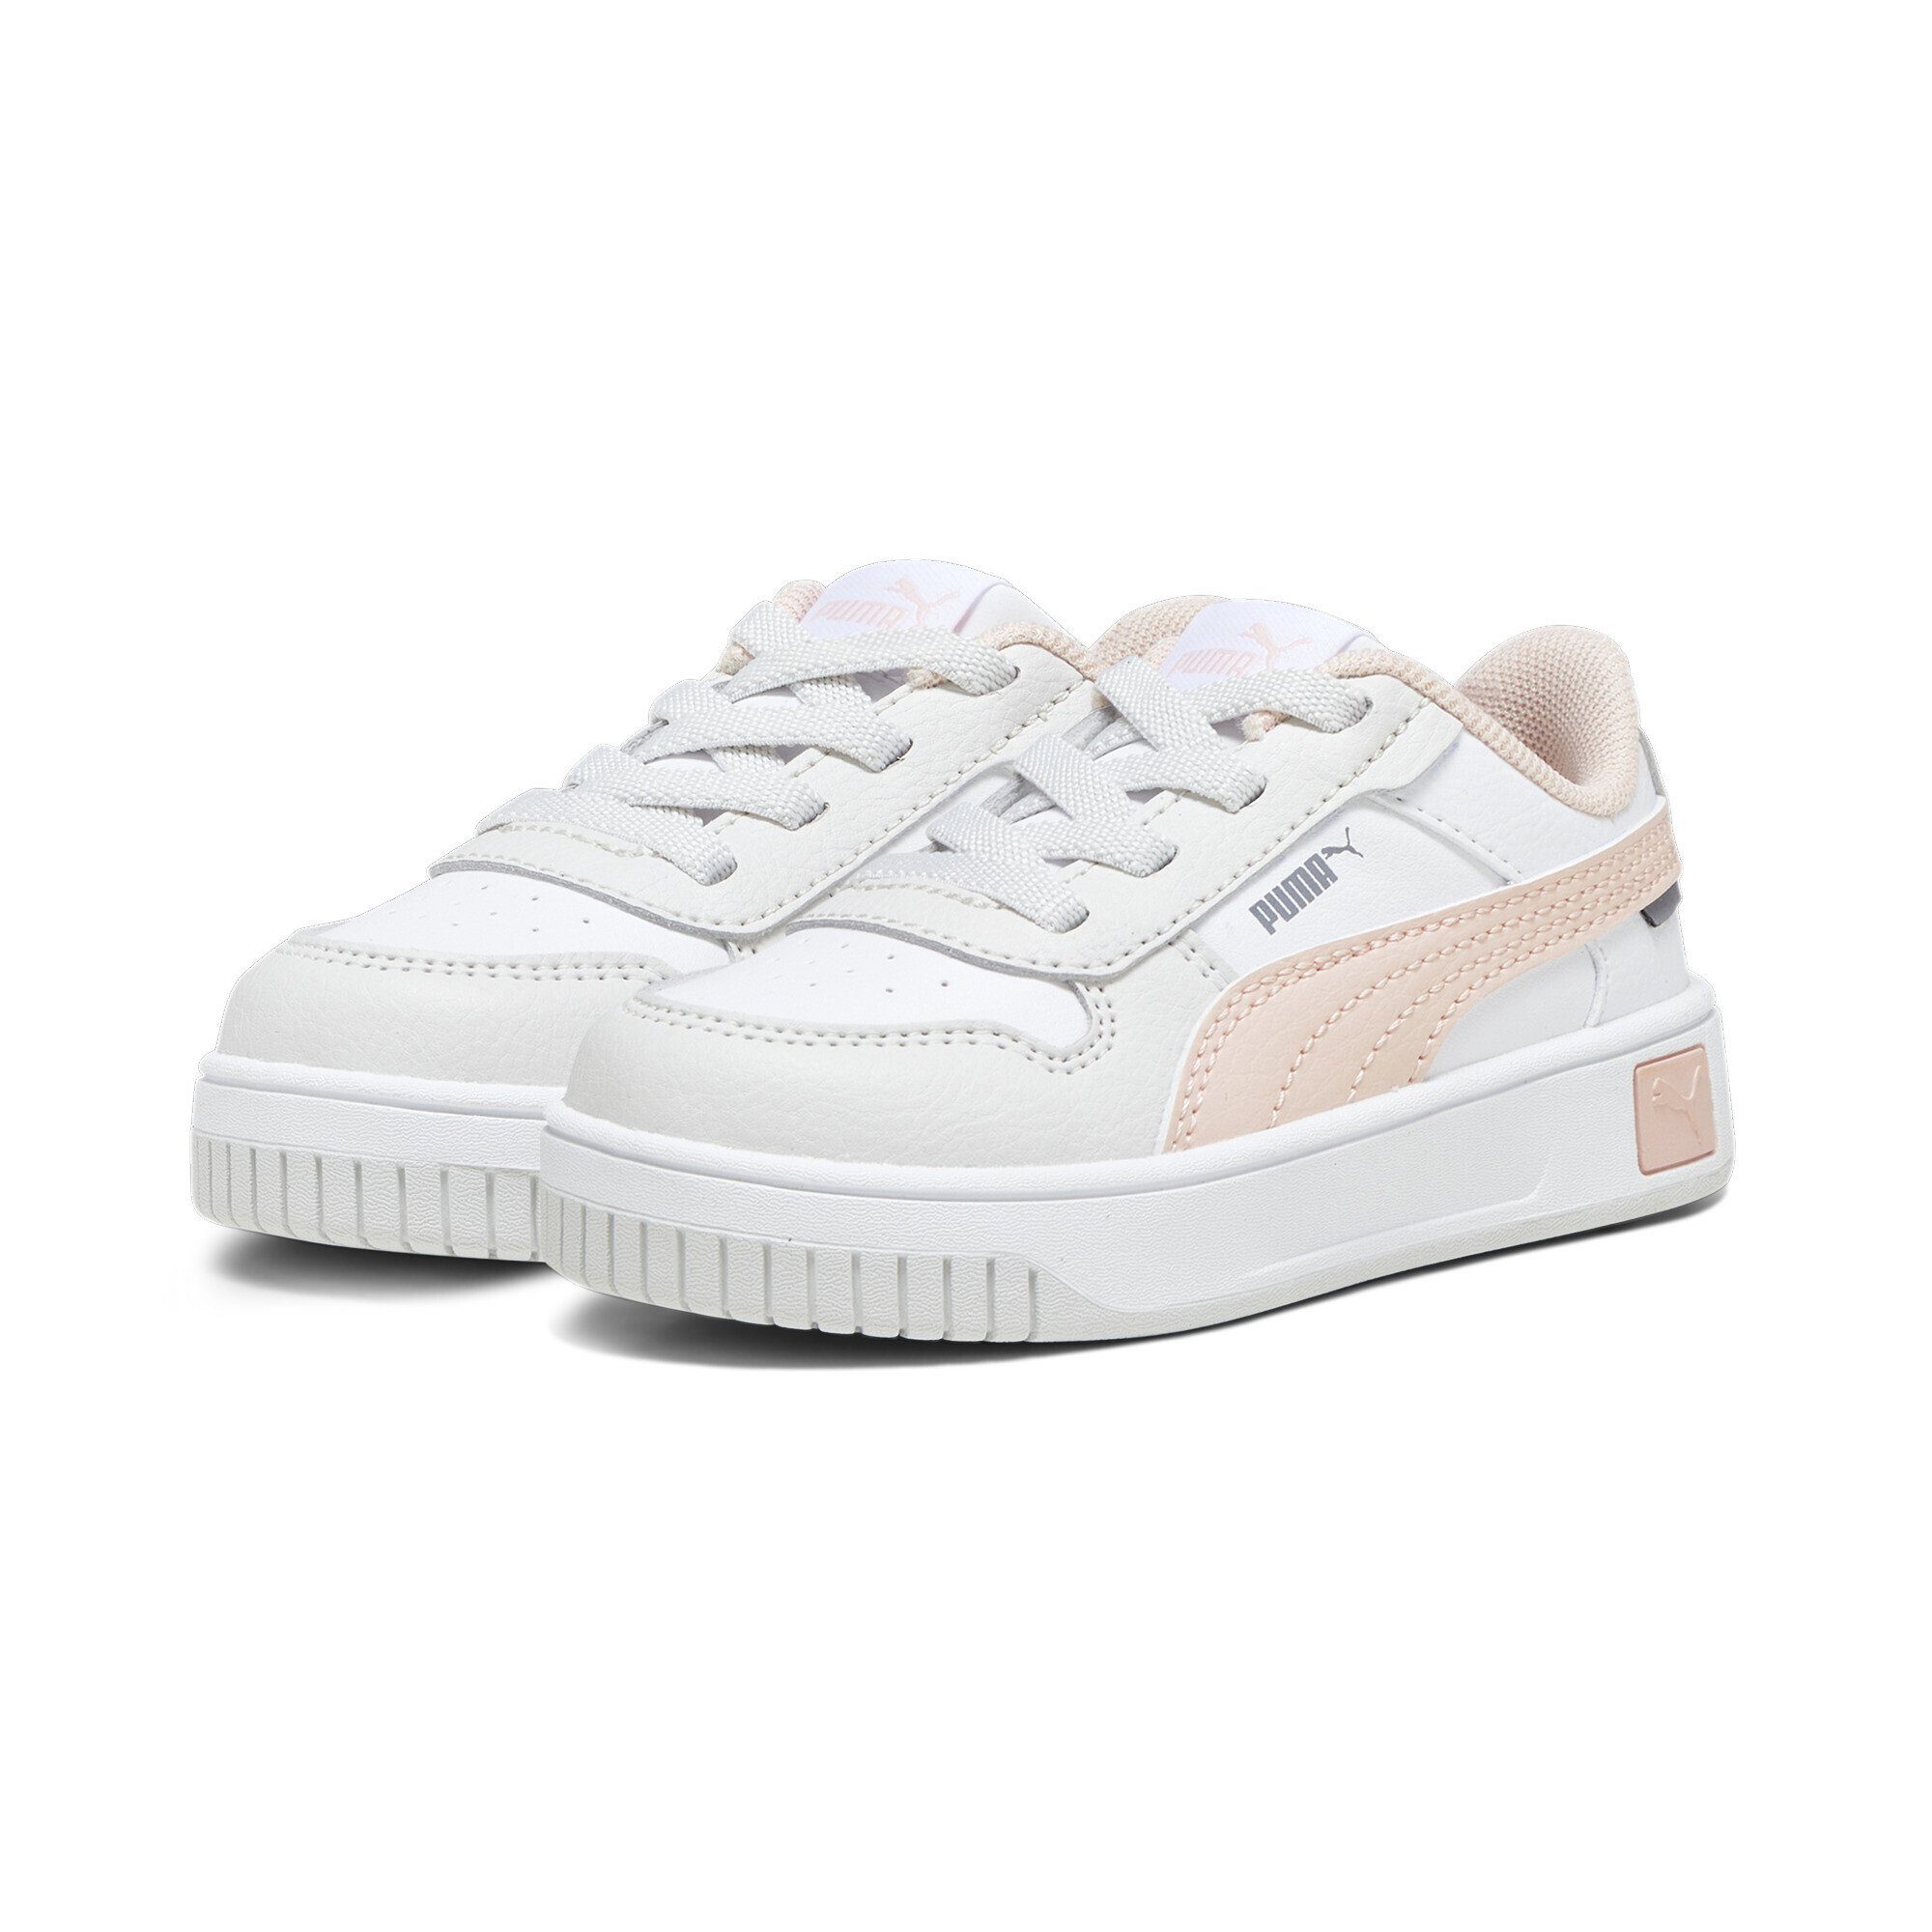 PUMA Carina Street Sneakers Mädchen Sneaker White Rose Dust Feather Gray Pink | Sneaker low